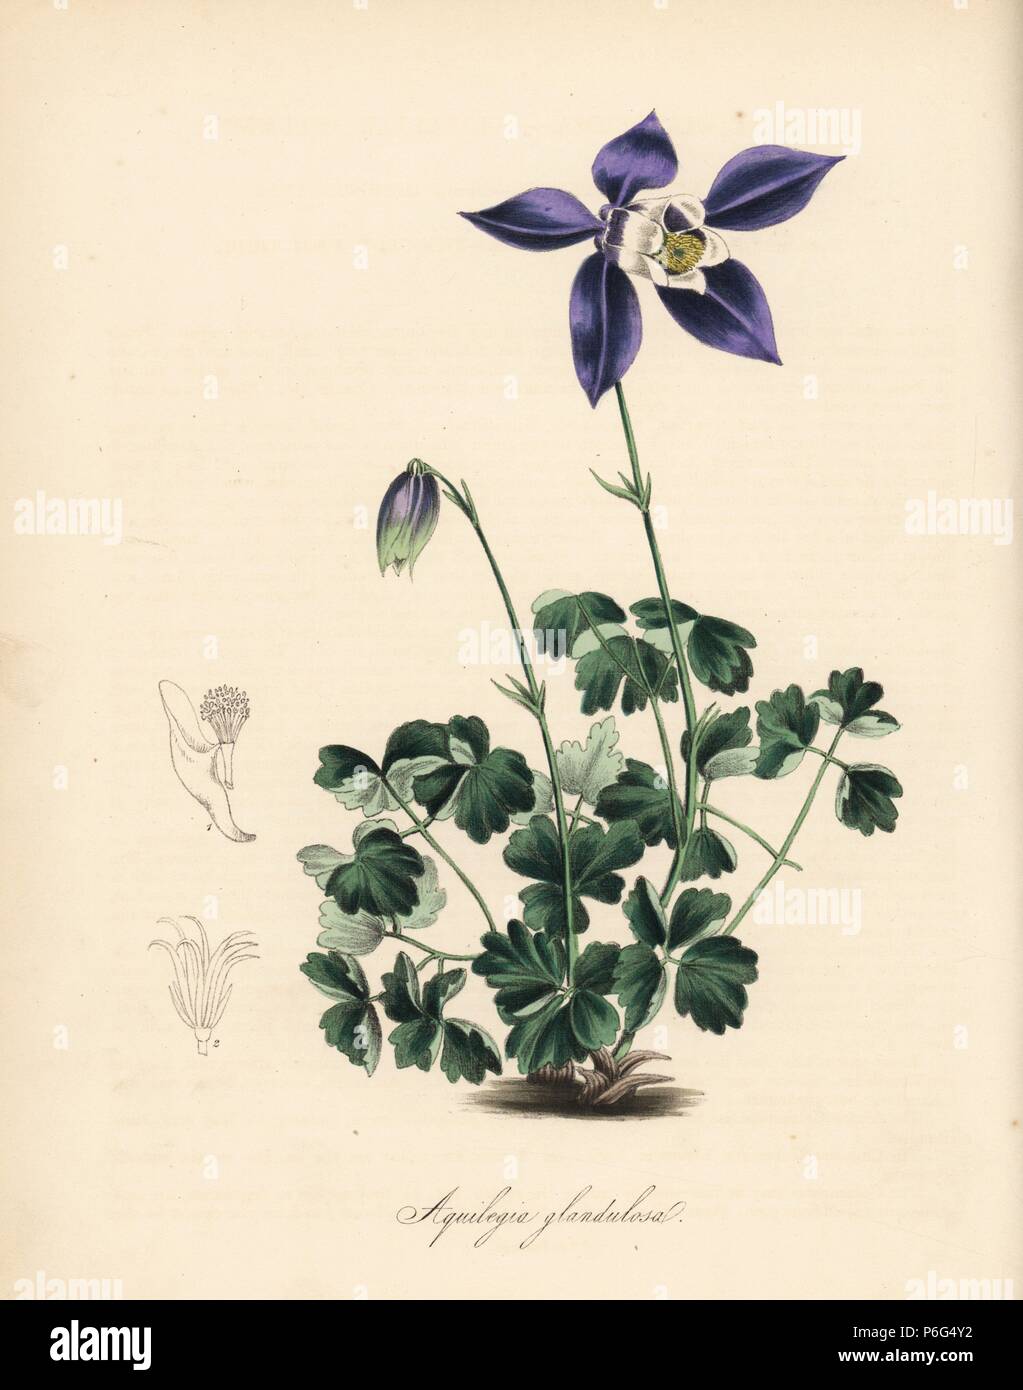 Glandular or Siberian columbine, Aquilegia glandulosa. Copied from an engraving by Miss Maund in 'The Botanist.' Handcoloured zincograph by C. Chabot drawn by Miss M. A. Burnett from her 'Plantae Utiliores: or Illustrations of Useful Plants,' Whittaker, London, 1842. Miss Burnett drew the botanical illustrations, but the text was chiefly by her late brother, British botanist Gilbert Thomas Burnett (1800-1835). Stock Photo